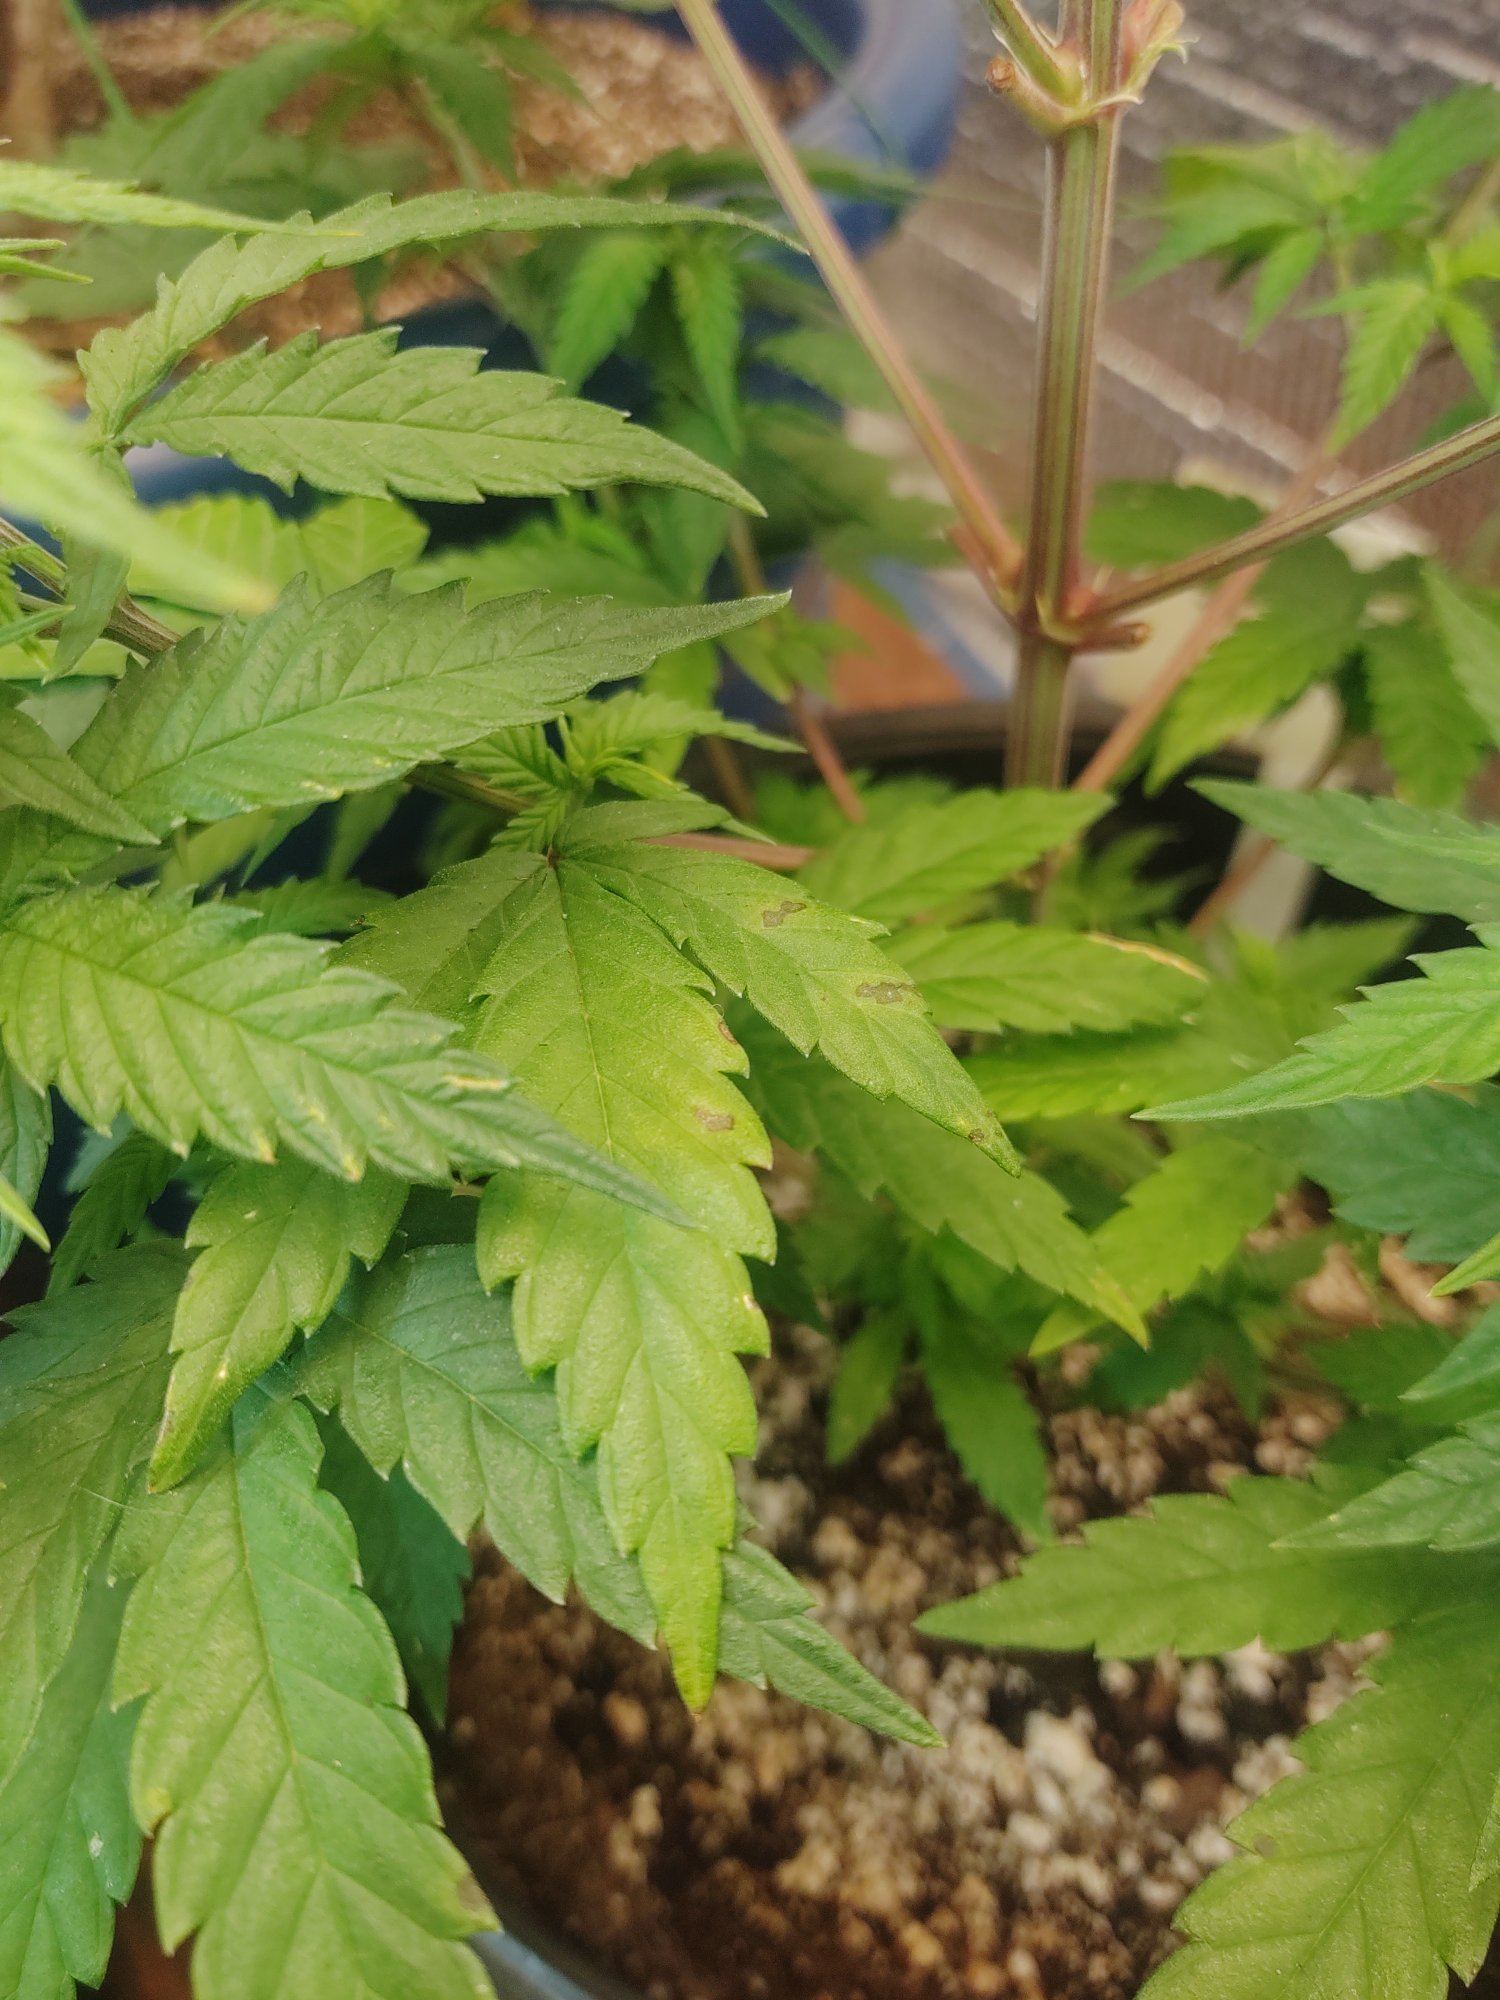 Issues with slowed growth and spots 4